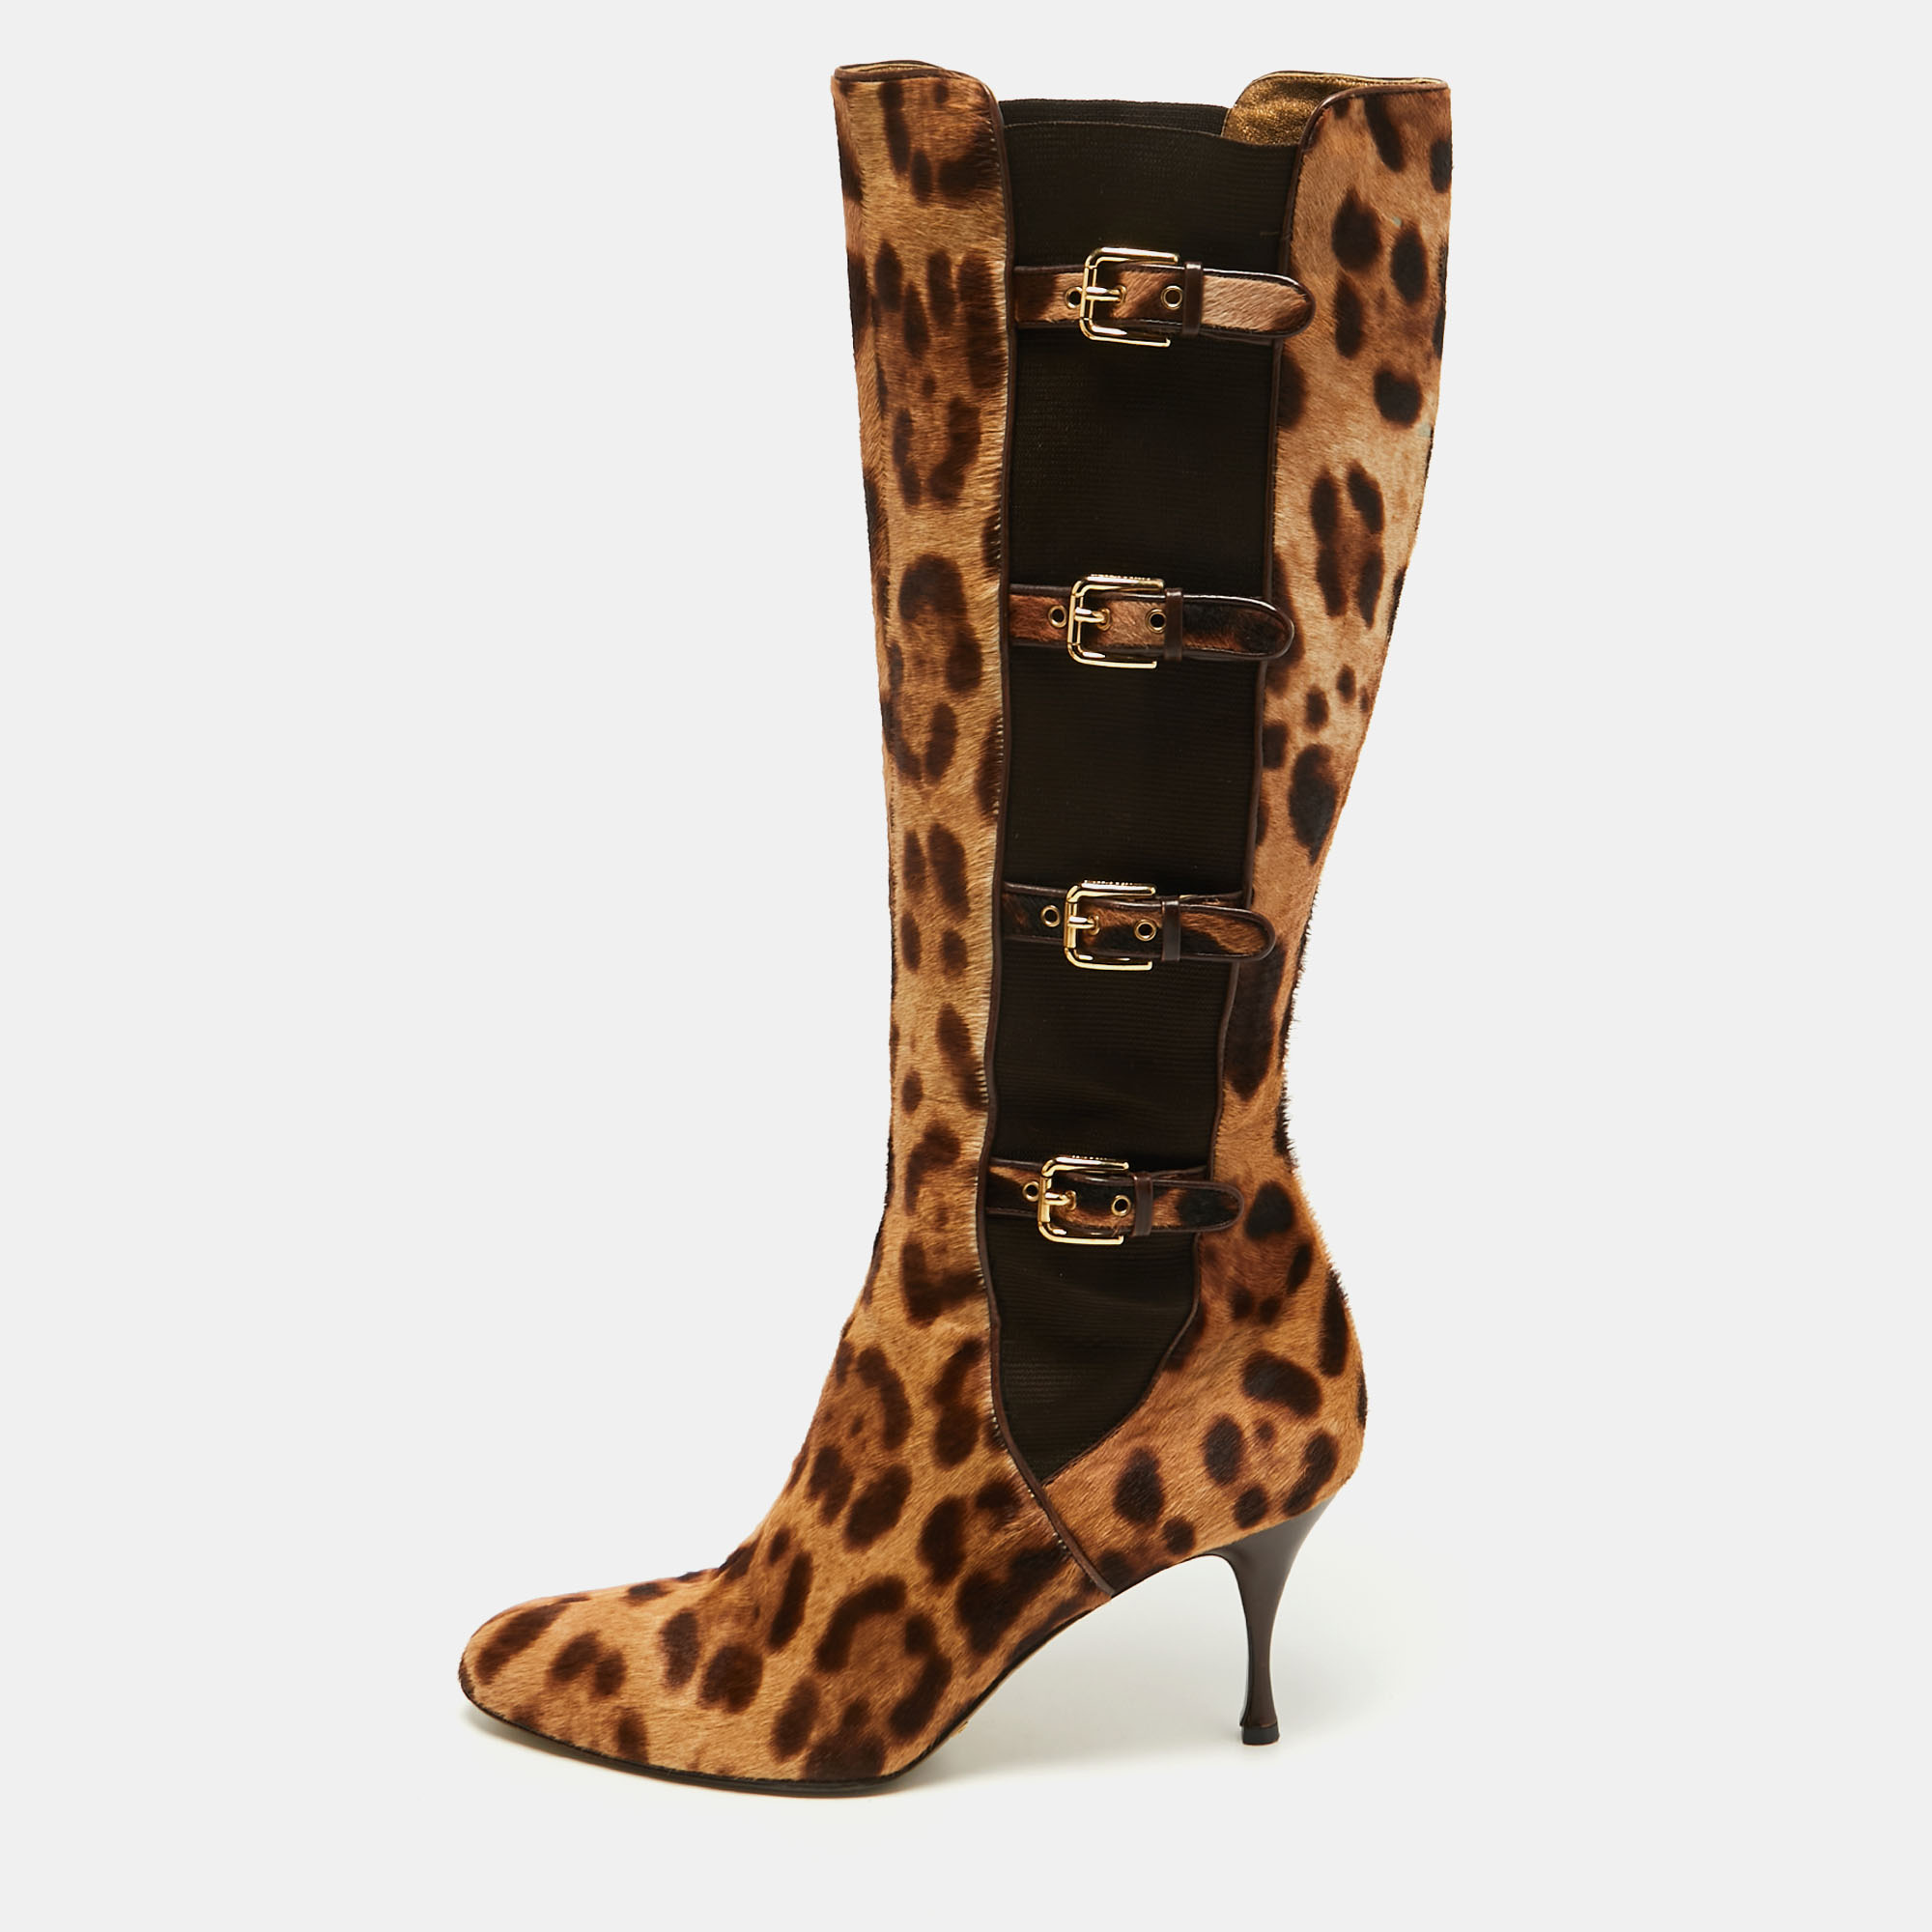 Pre-owned Dolce & Gabbana Brown/brown Leopard Print Calf Hair Knee Length Boots Size 41